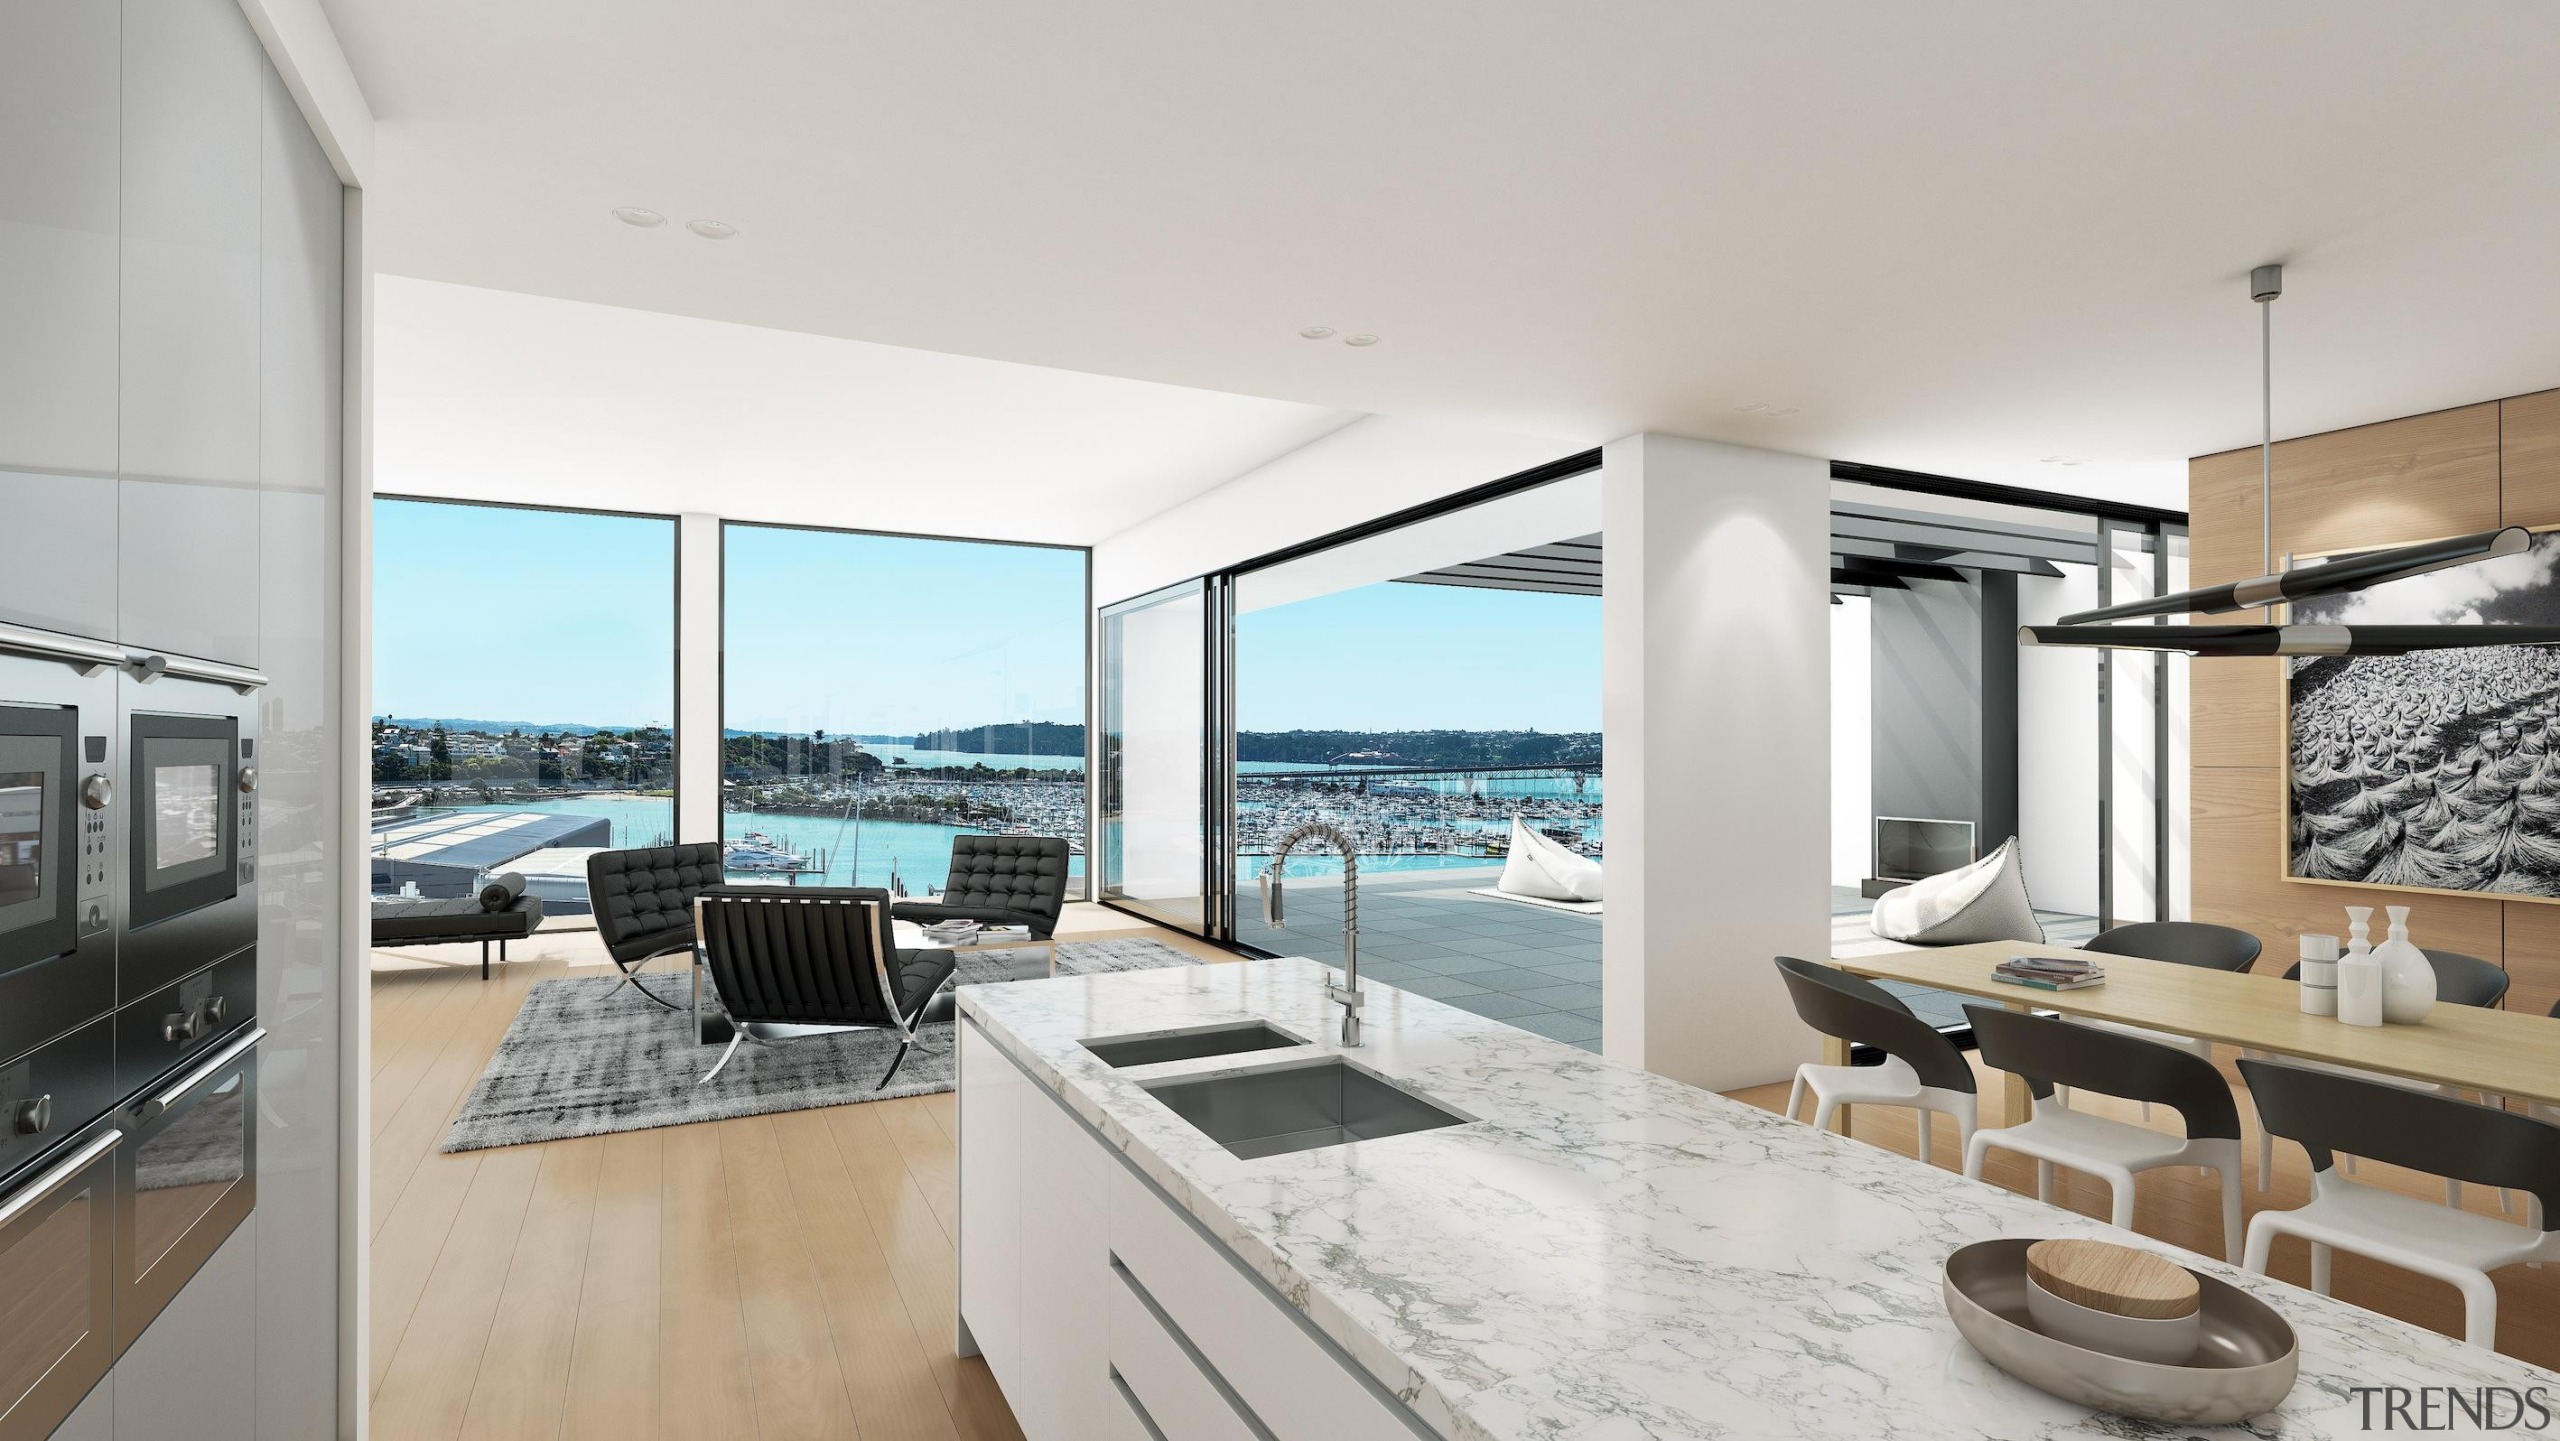 The first stage of Wynyard Central is an apartment, interior design, penthouse apartment, property, real estate, gray